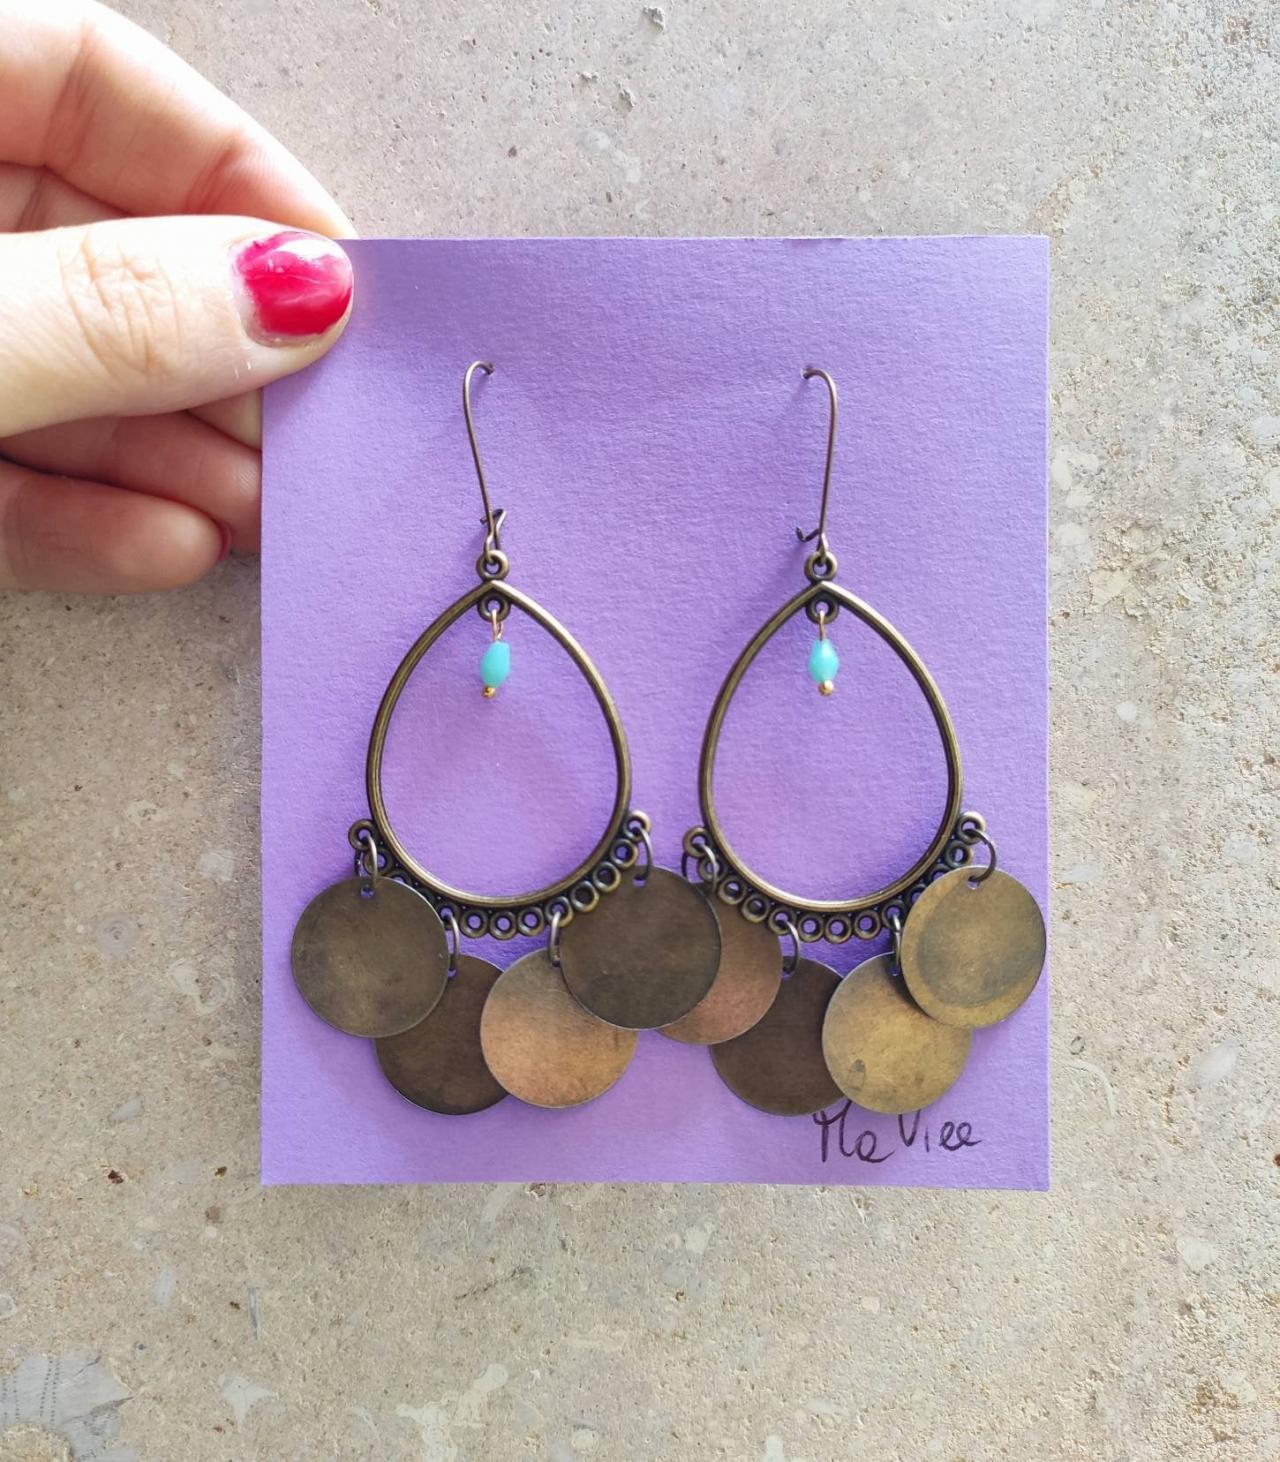 Bronze Brass Pendant Earrings, Very Light, With Dime And Crystal Blue Pendants. Hook Closure